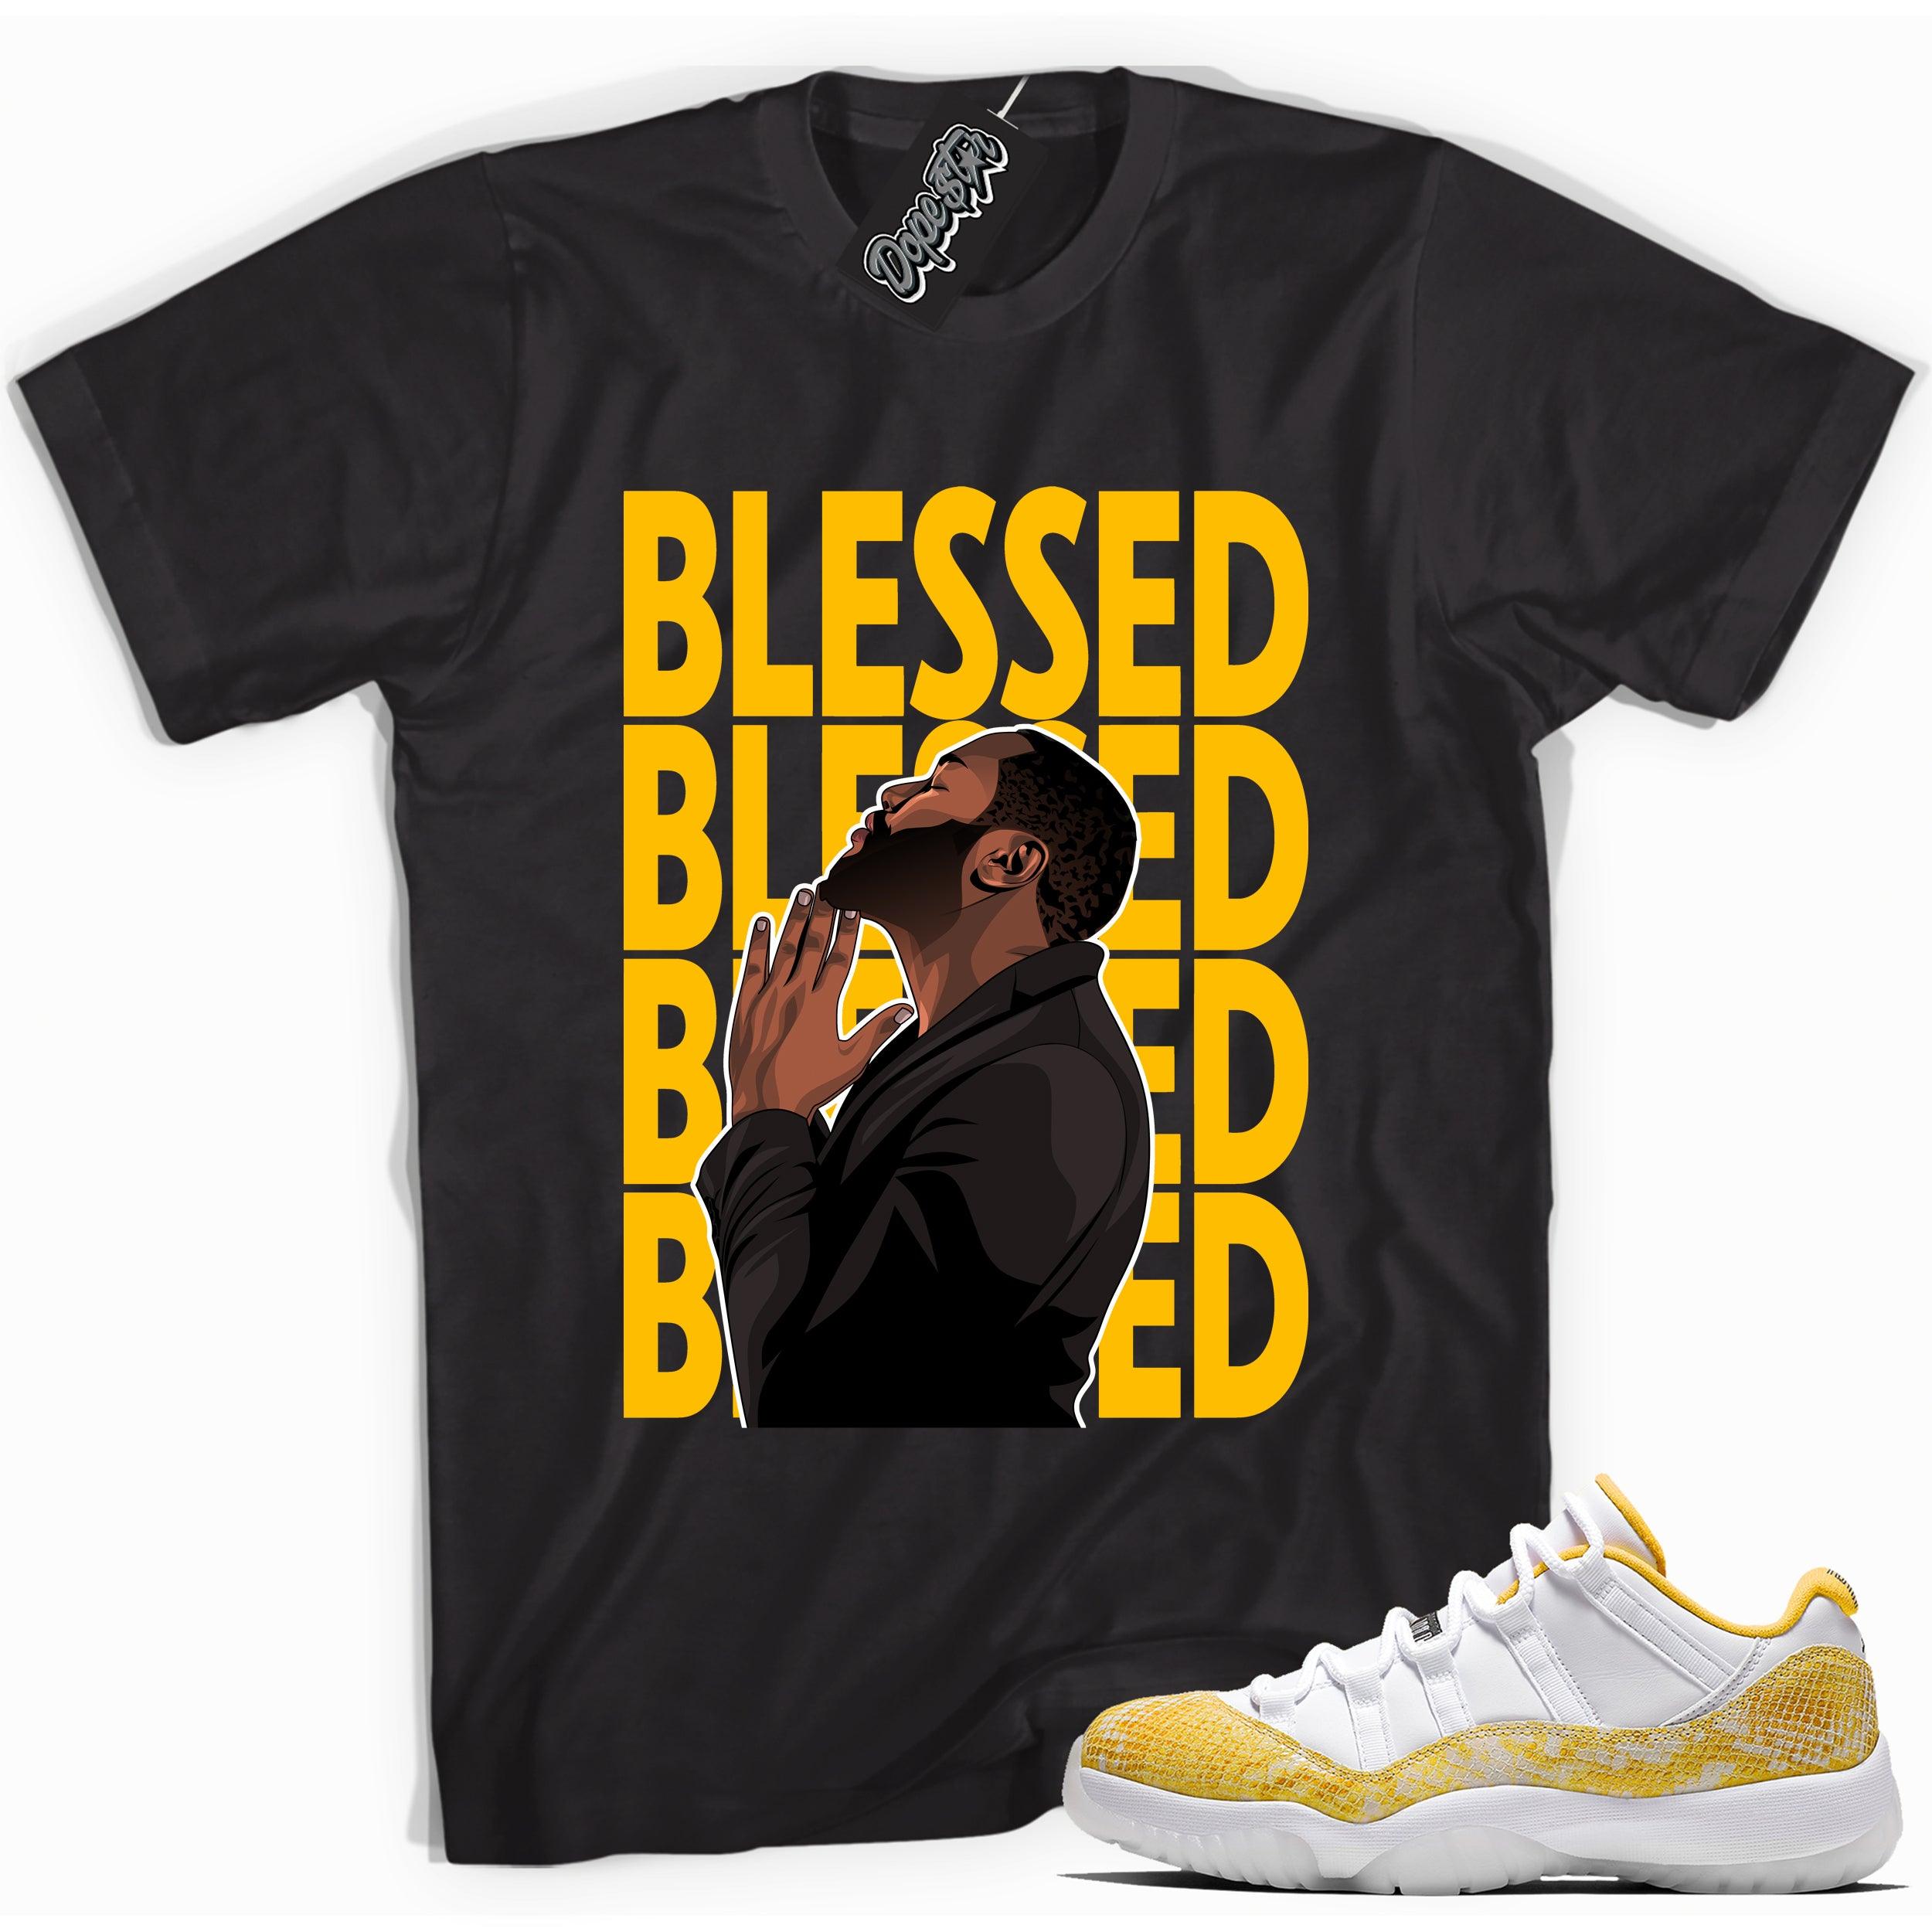 Cool black graphic tee with 'god blessed' print, that perfectly matches  Air Jordan 11 Low Yellow Snakeskin sneakers